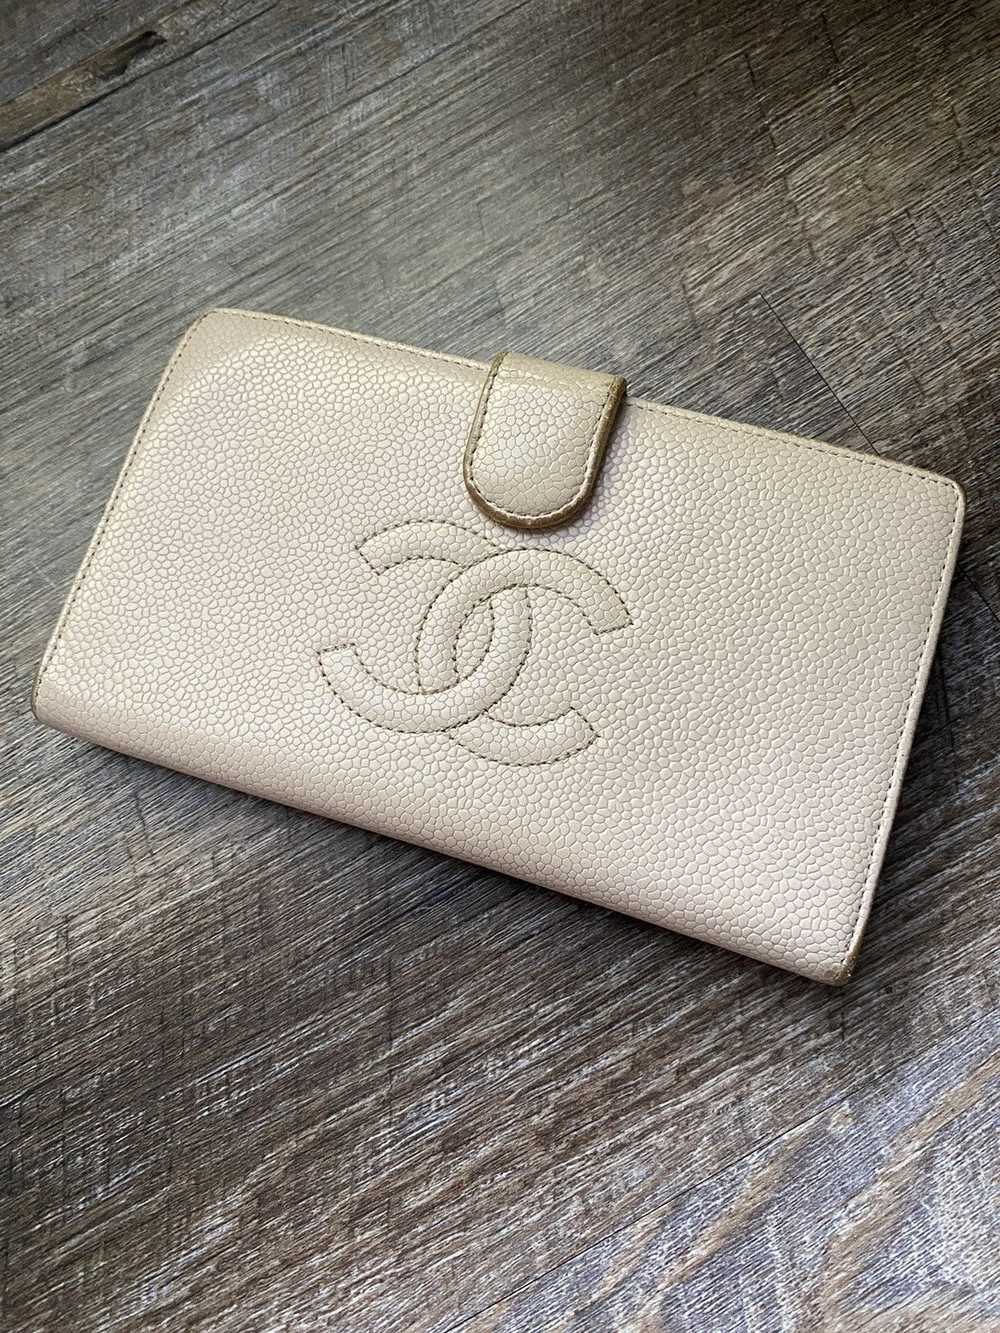 Chanel Chanel CC Caviar leather long wallet - image 1